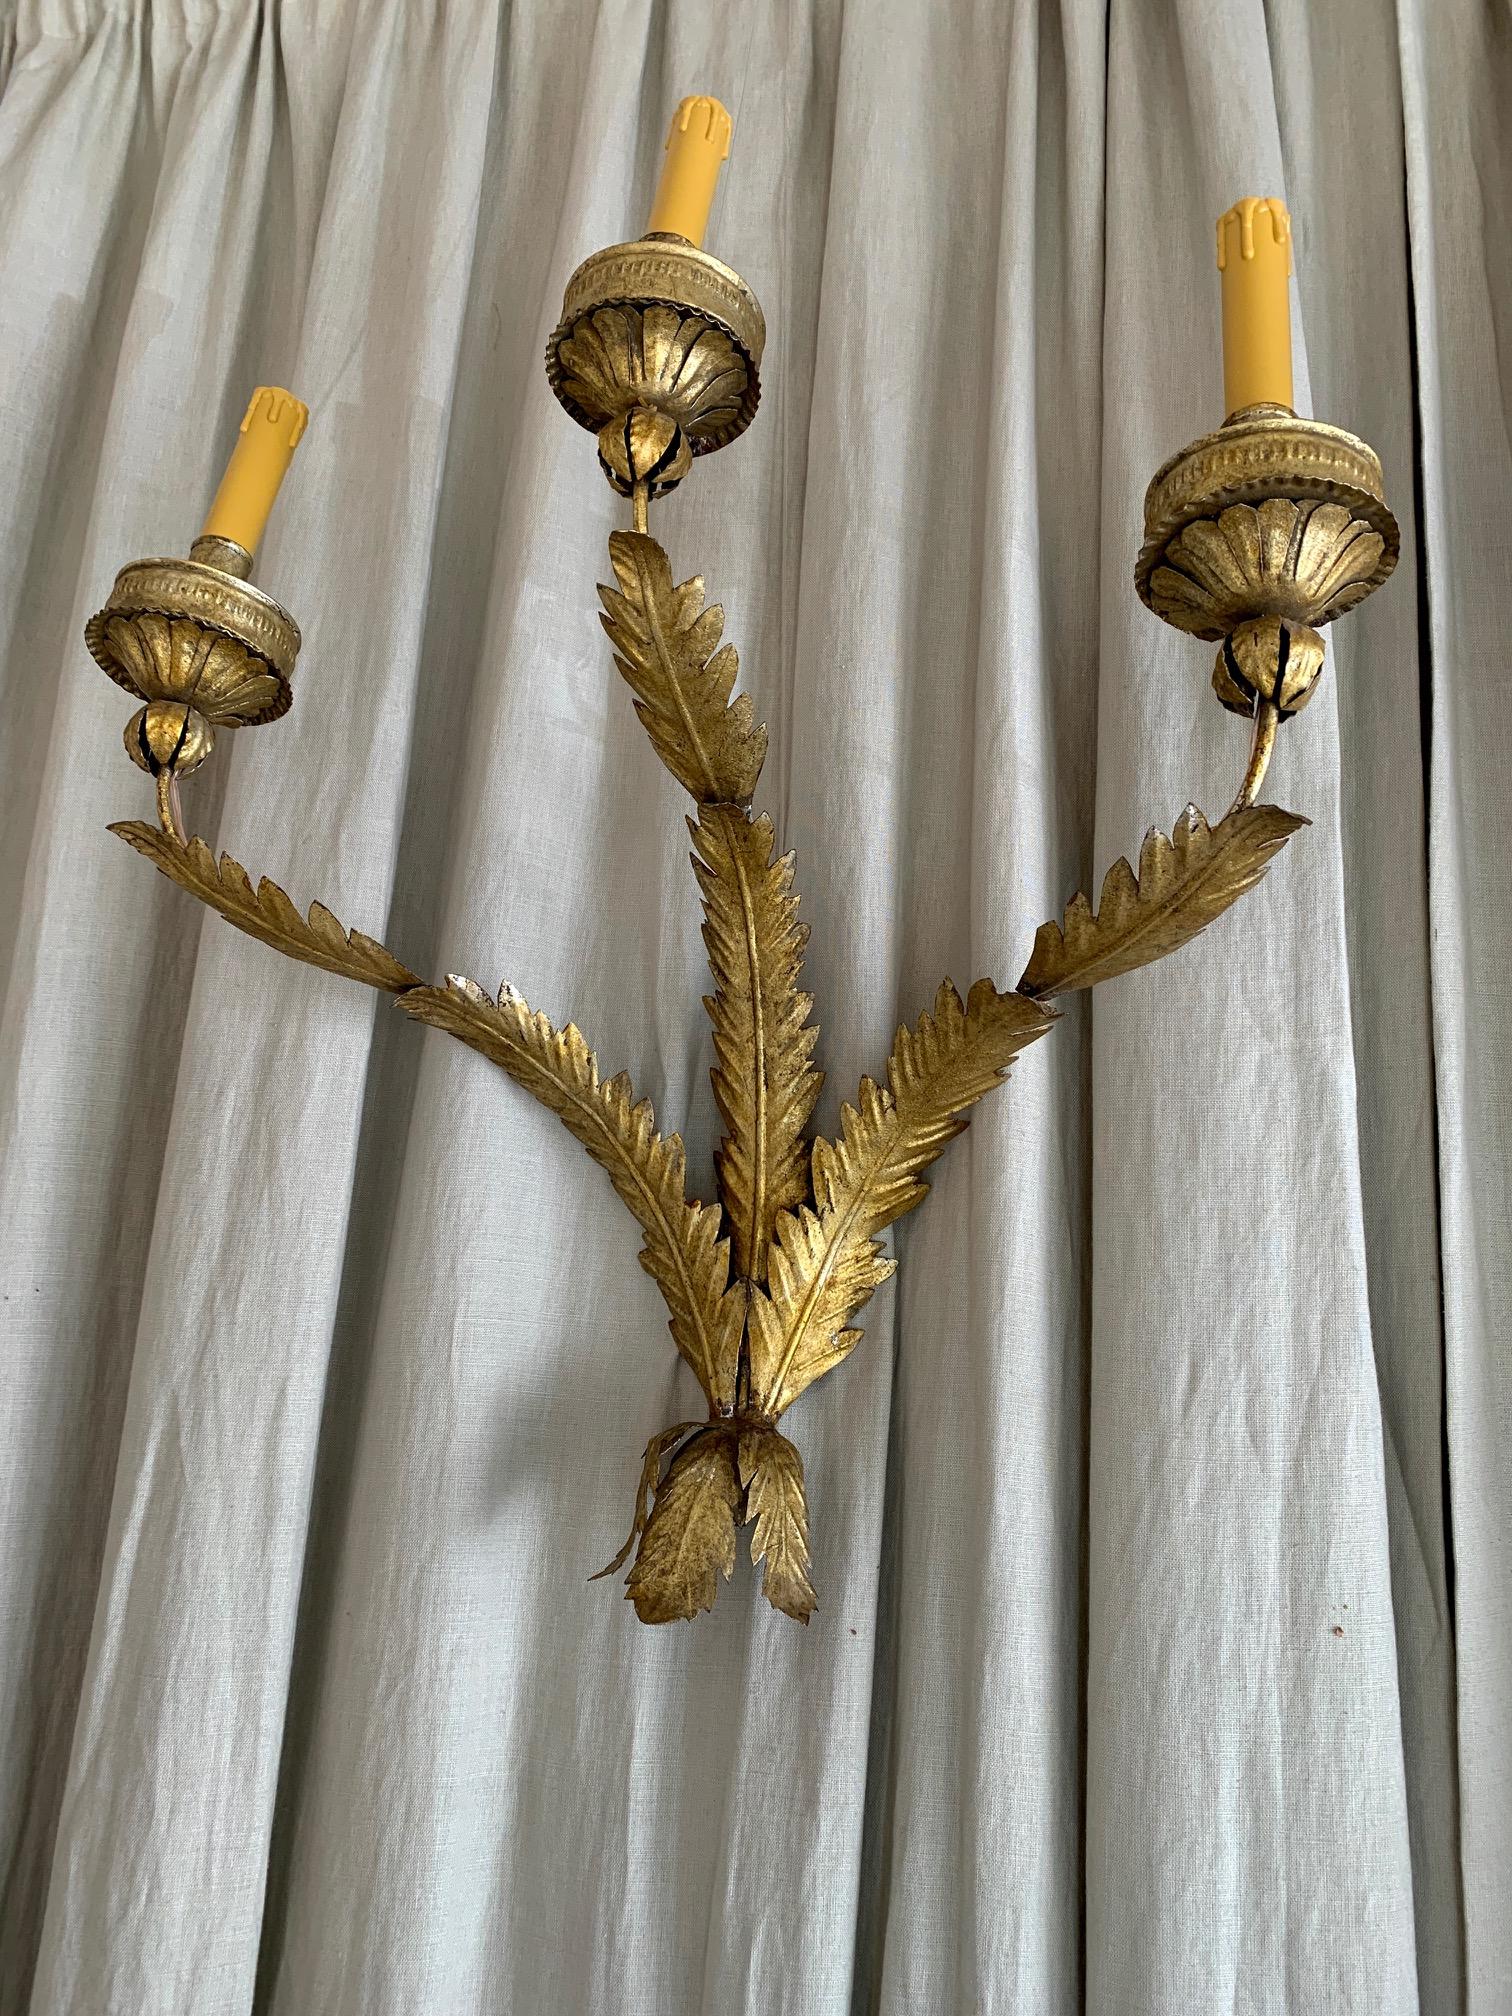 Pair of large Spanish wall lights, circa 1940 in gilt iron imitating plant motifs in each of its three arms, it has been electified for use, new and operational electrical installation.